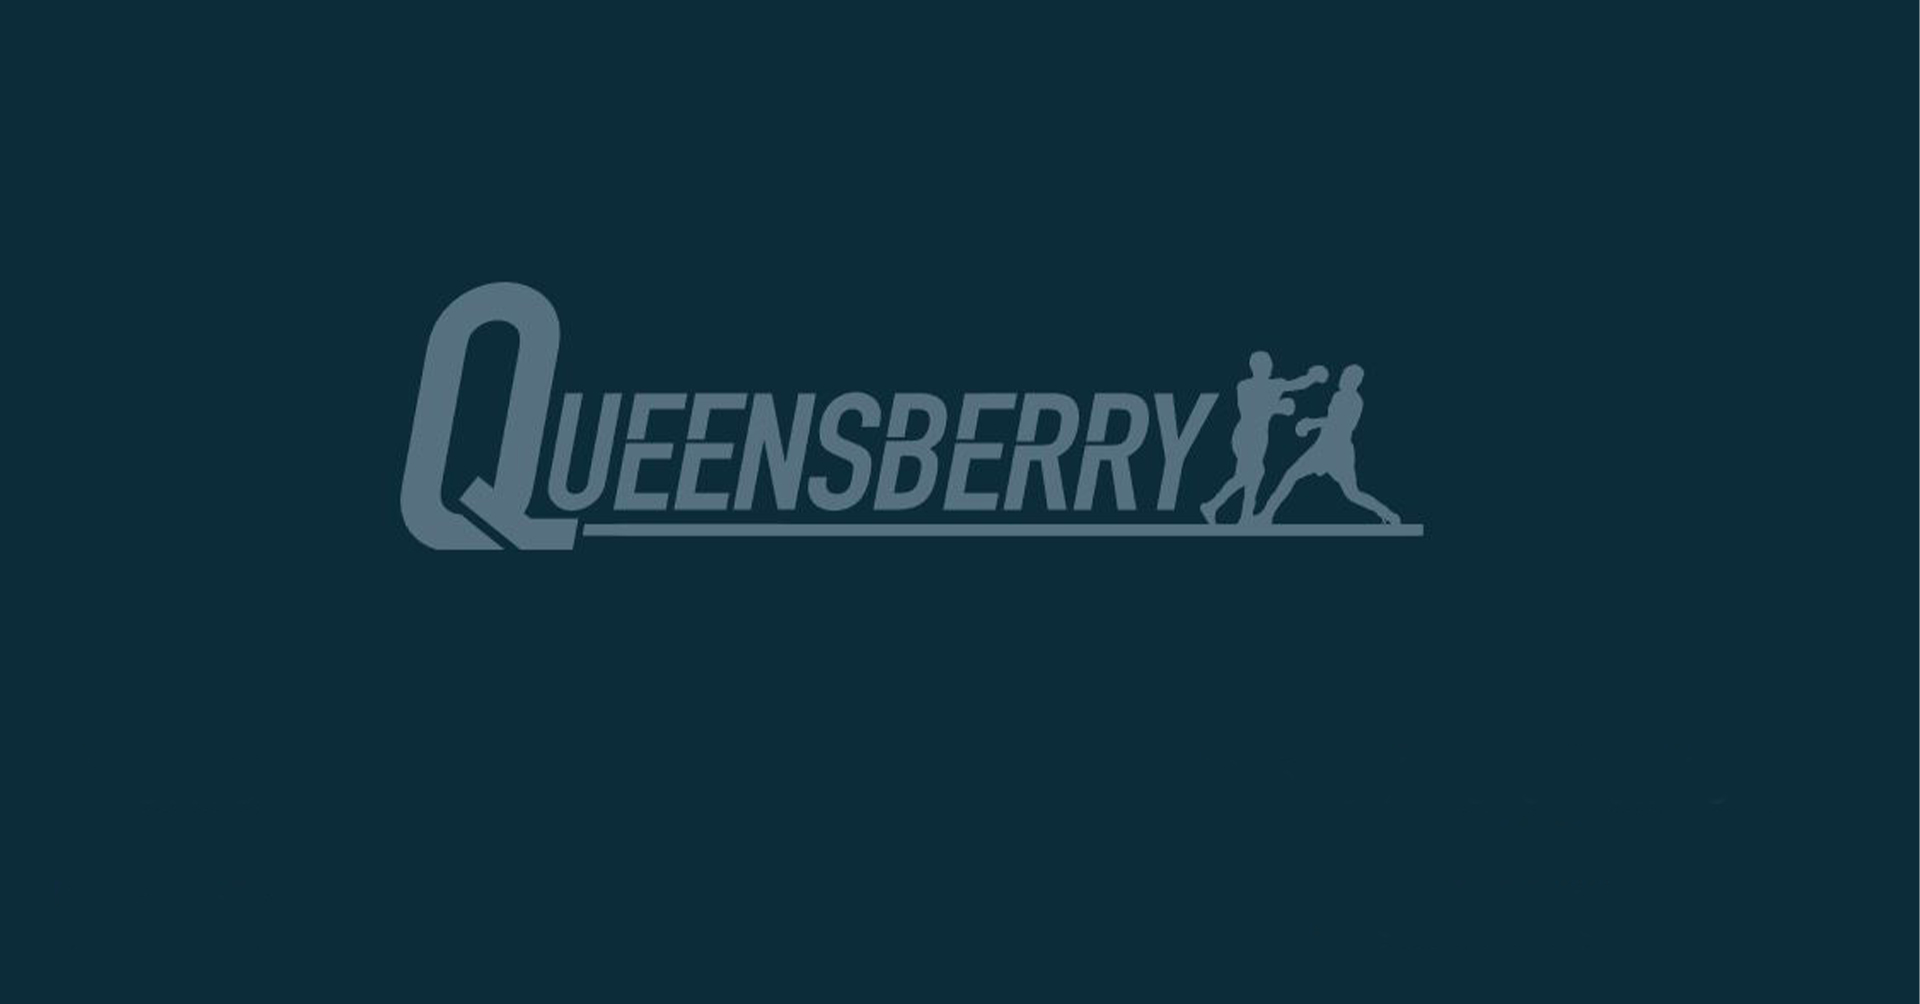 Queensberry Promotions готви голяма медийна сделка